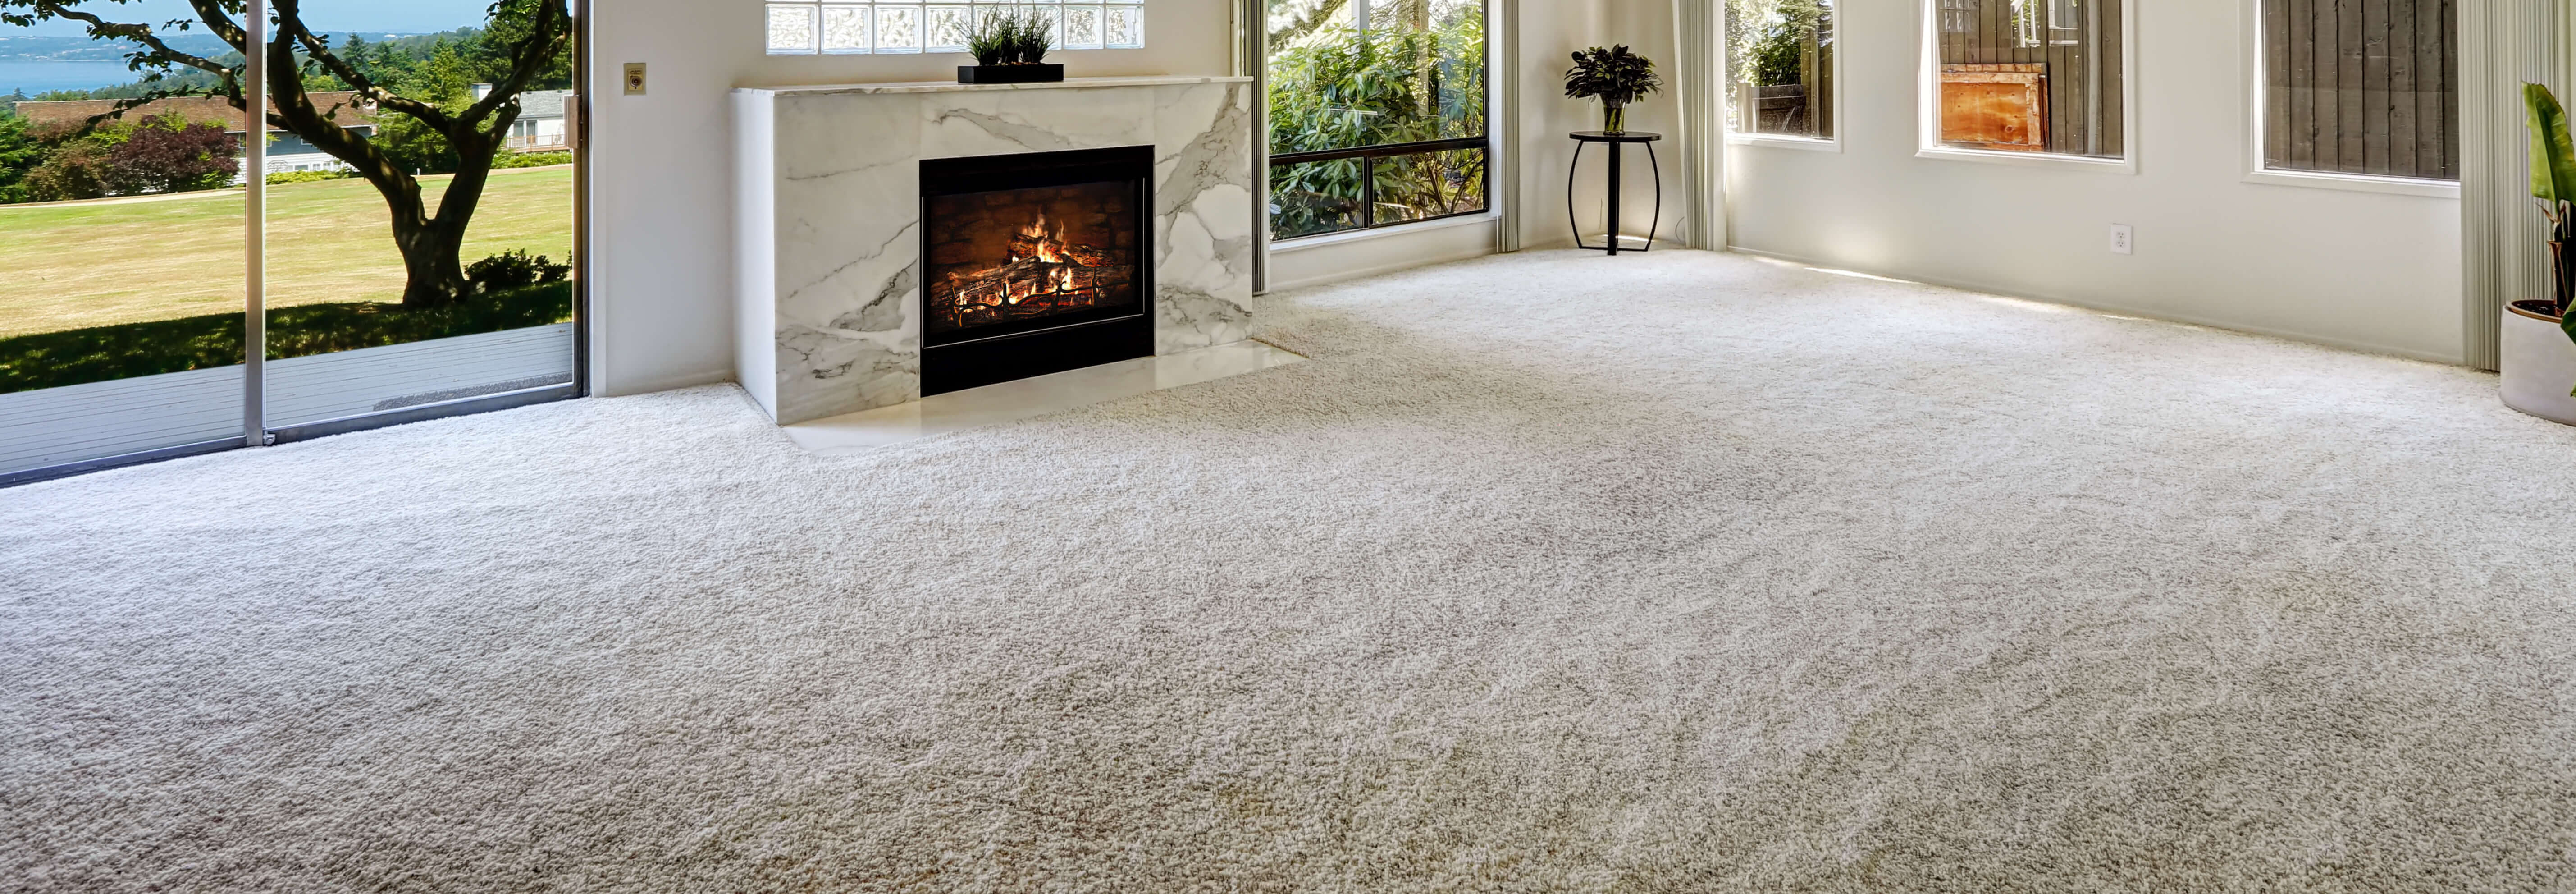 Beautiful carpeted living room